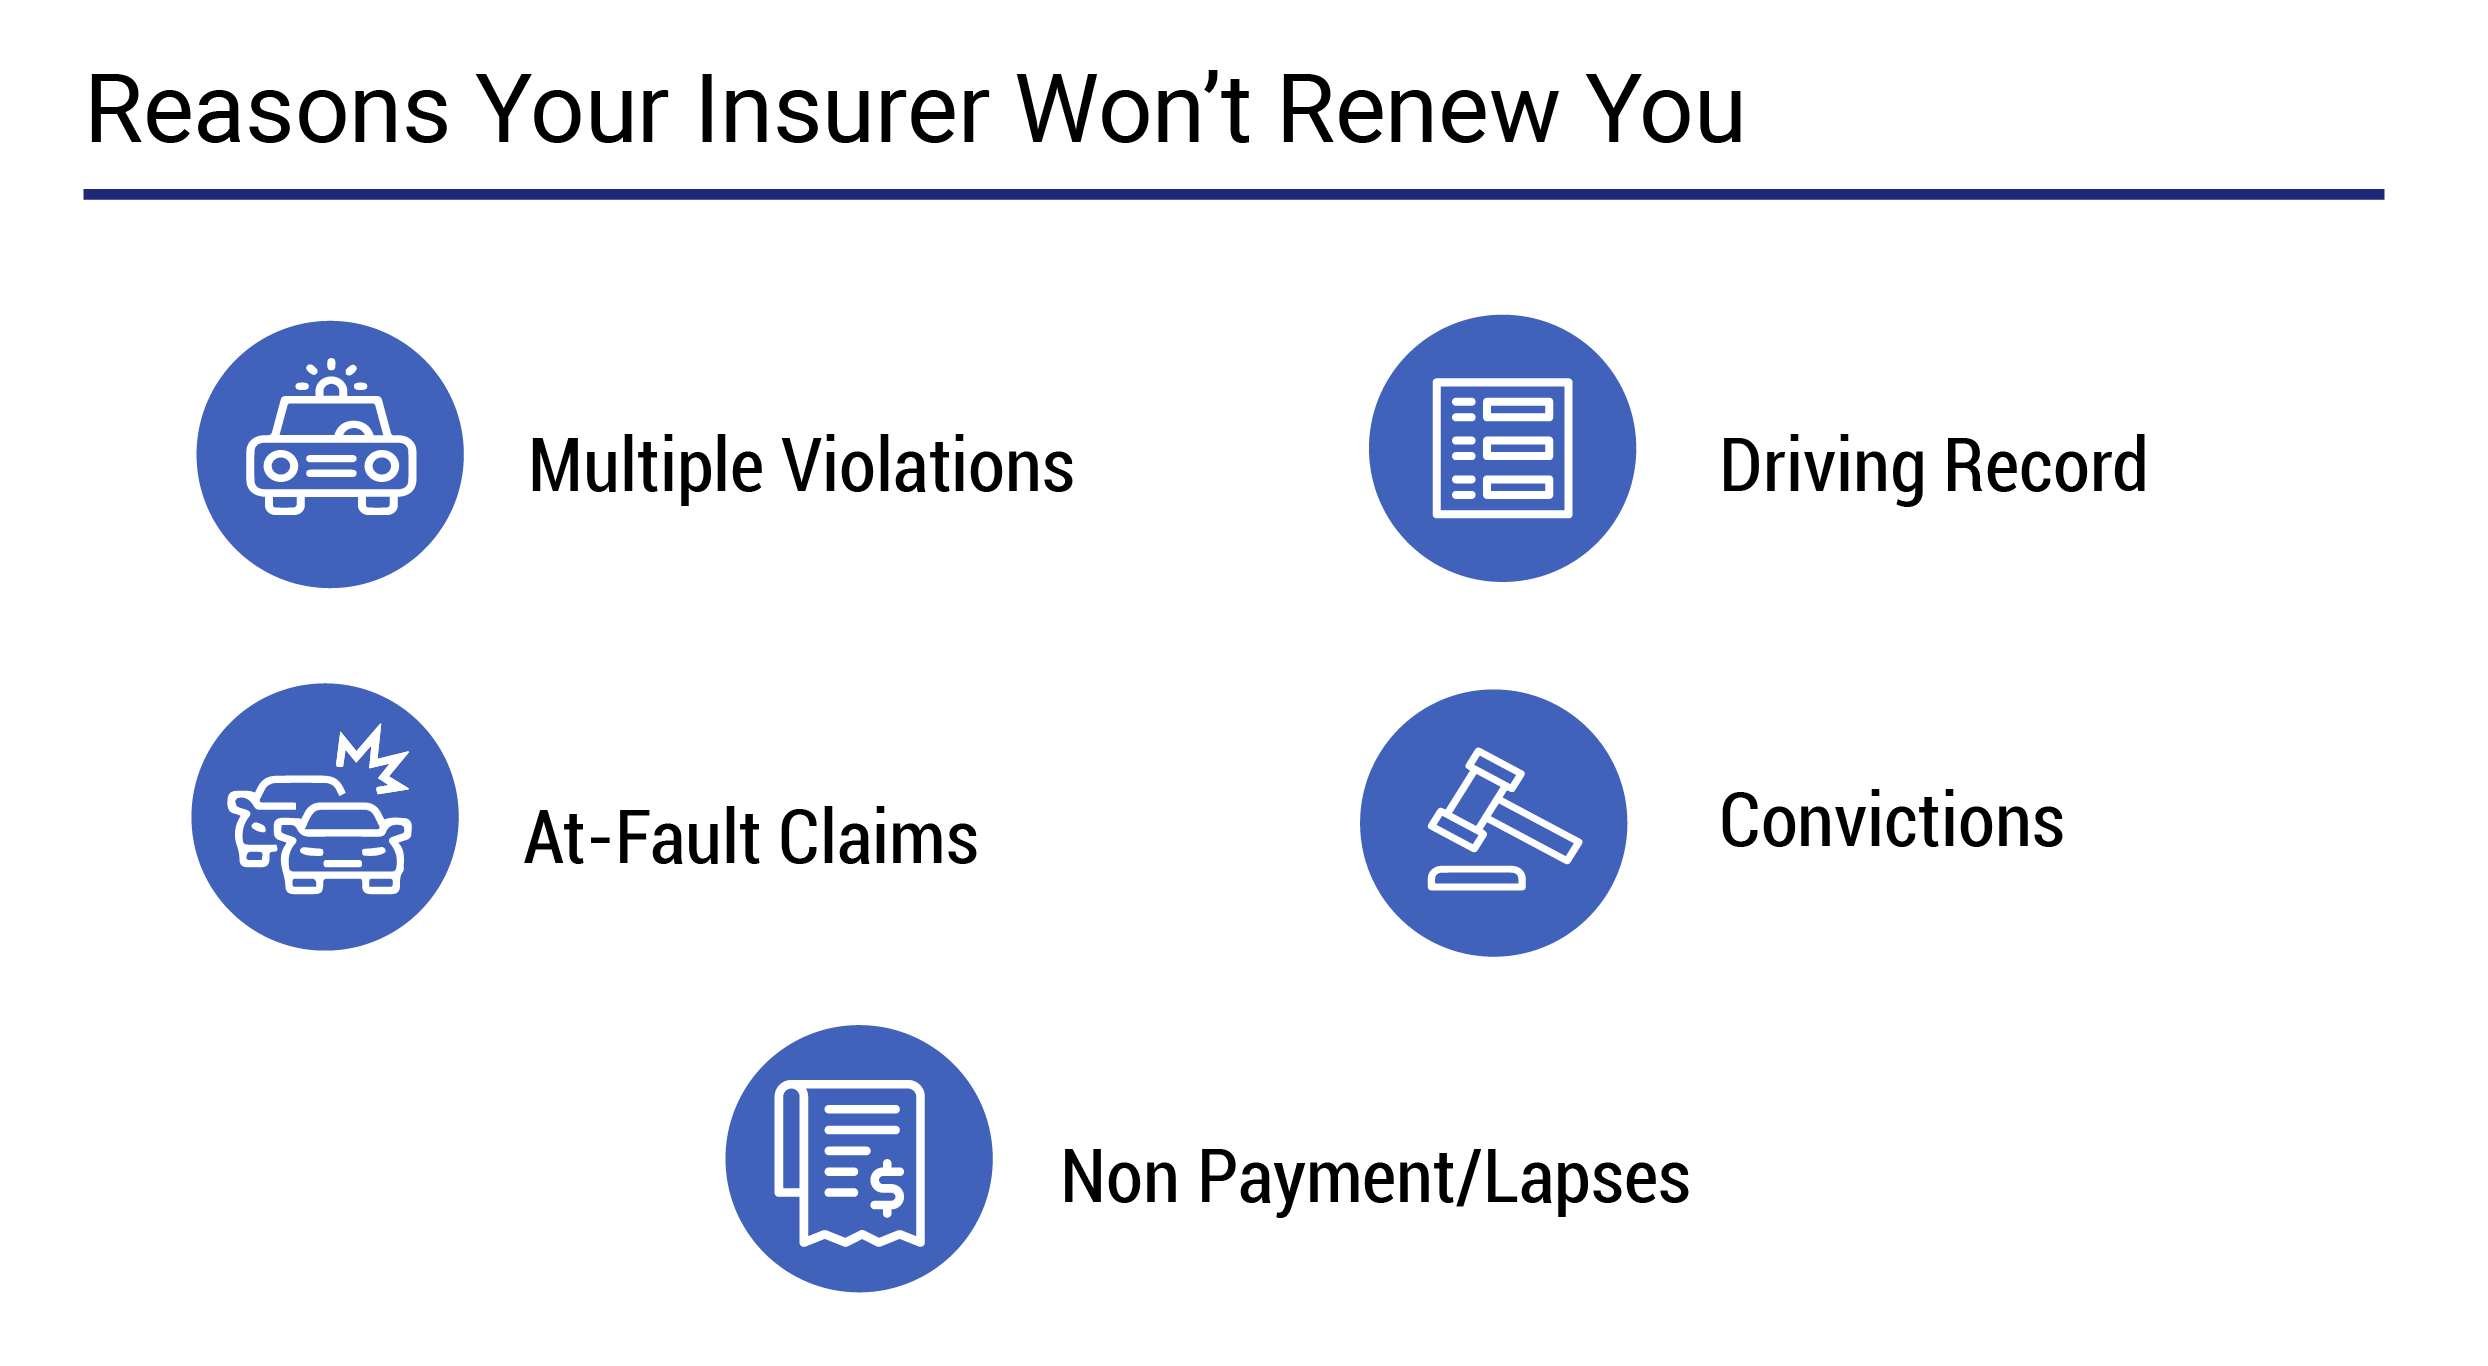 Why your insurer won't renew you